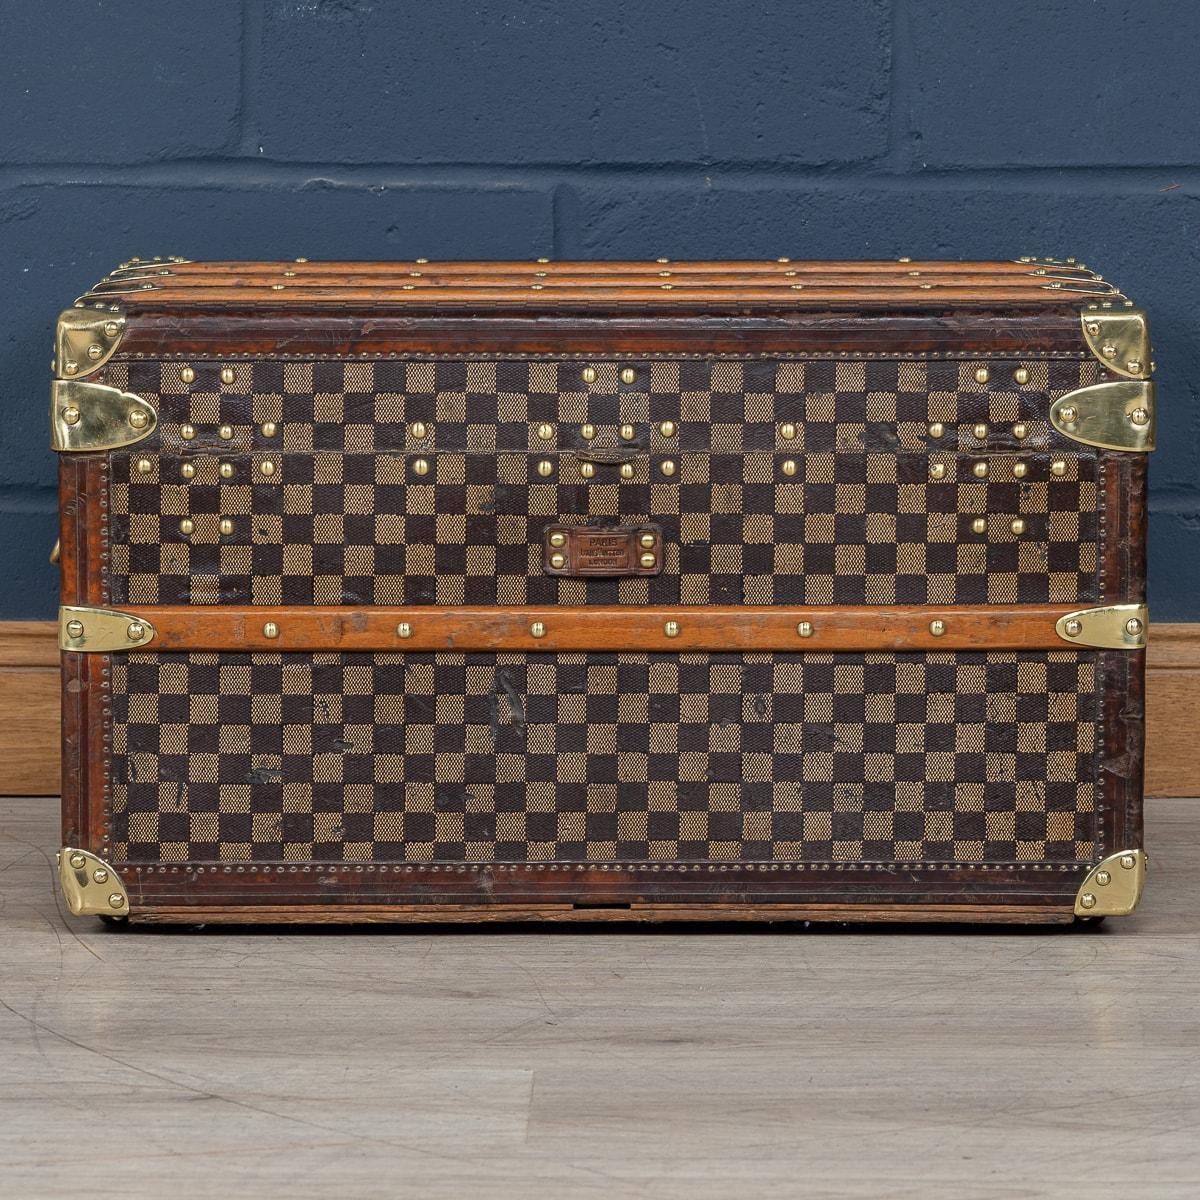 French Rare 19th Century Louis Vuitton Shirt Trunk In Damier Canvas, France c.1895 For Sale